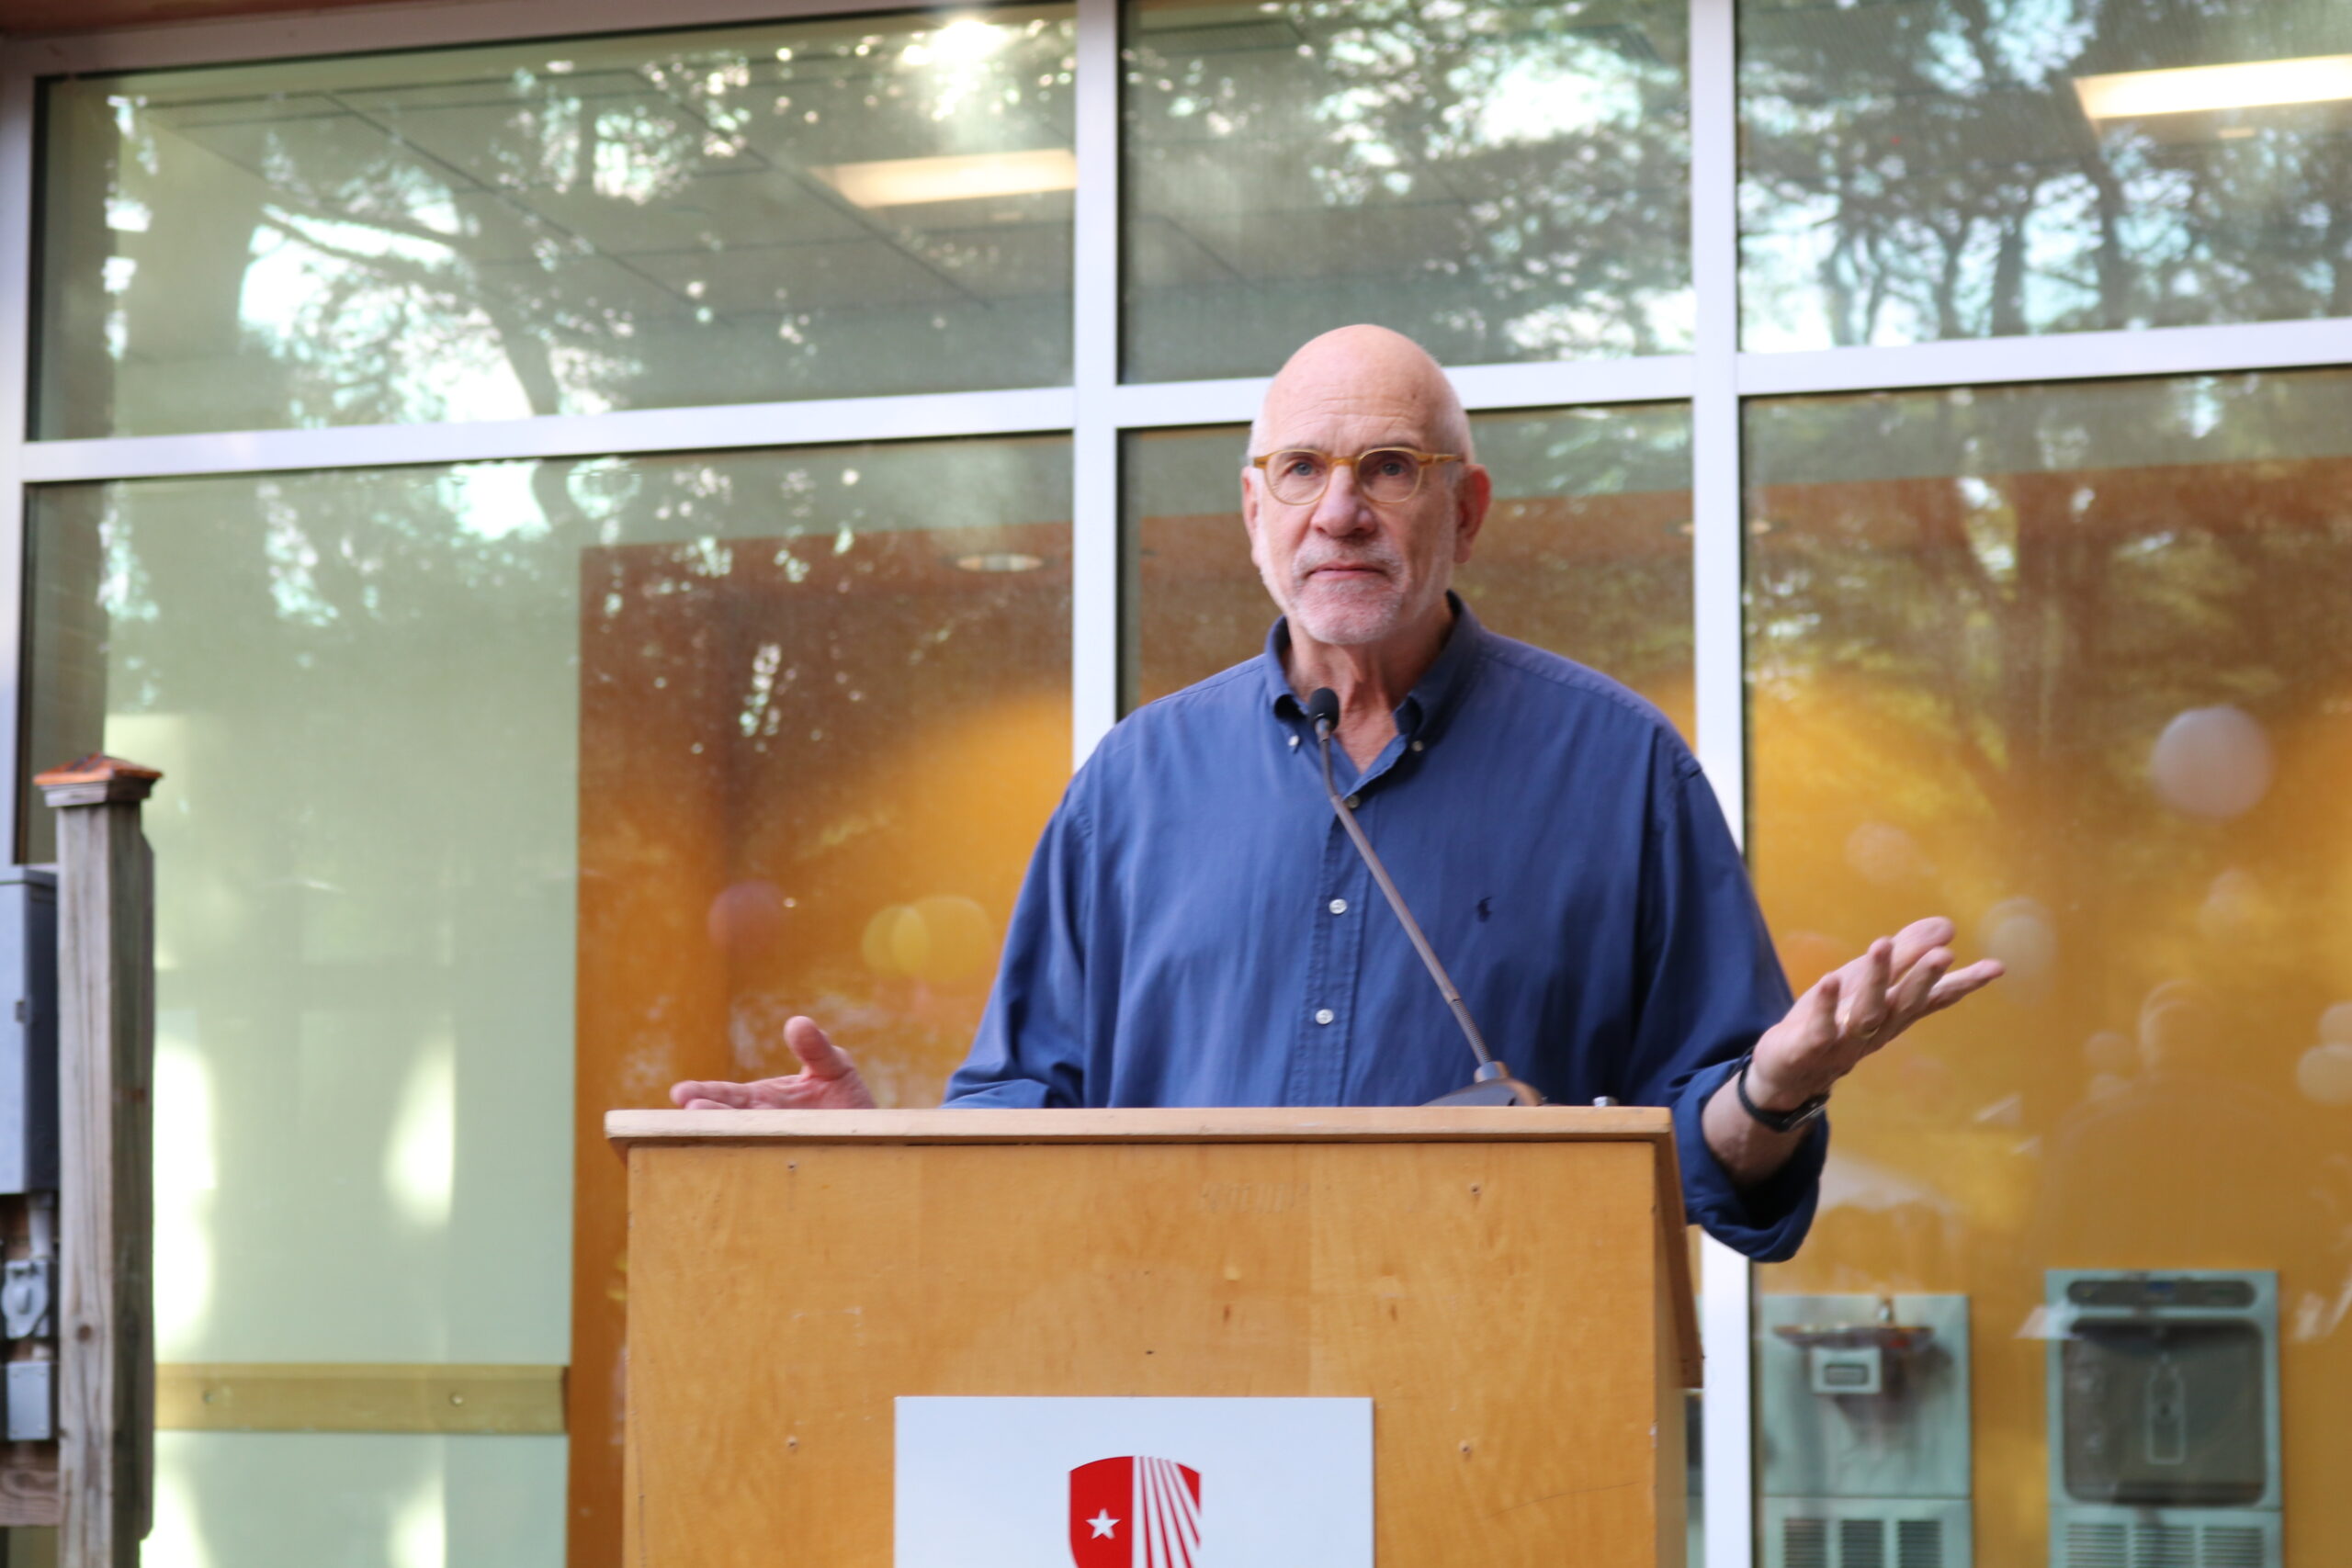 Stony Brook Southampton Associate Provost Robert Reeves spoke during a ceremony commemorating the re-naming of Southampton Arts to the Lichtenstein Center earlier this month.